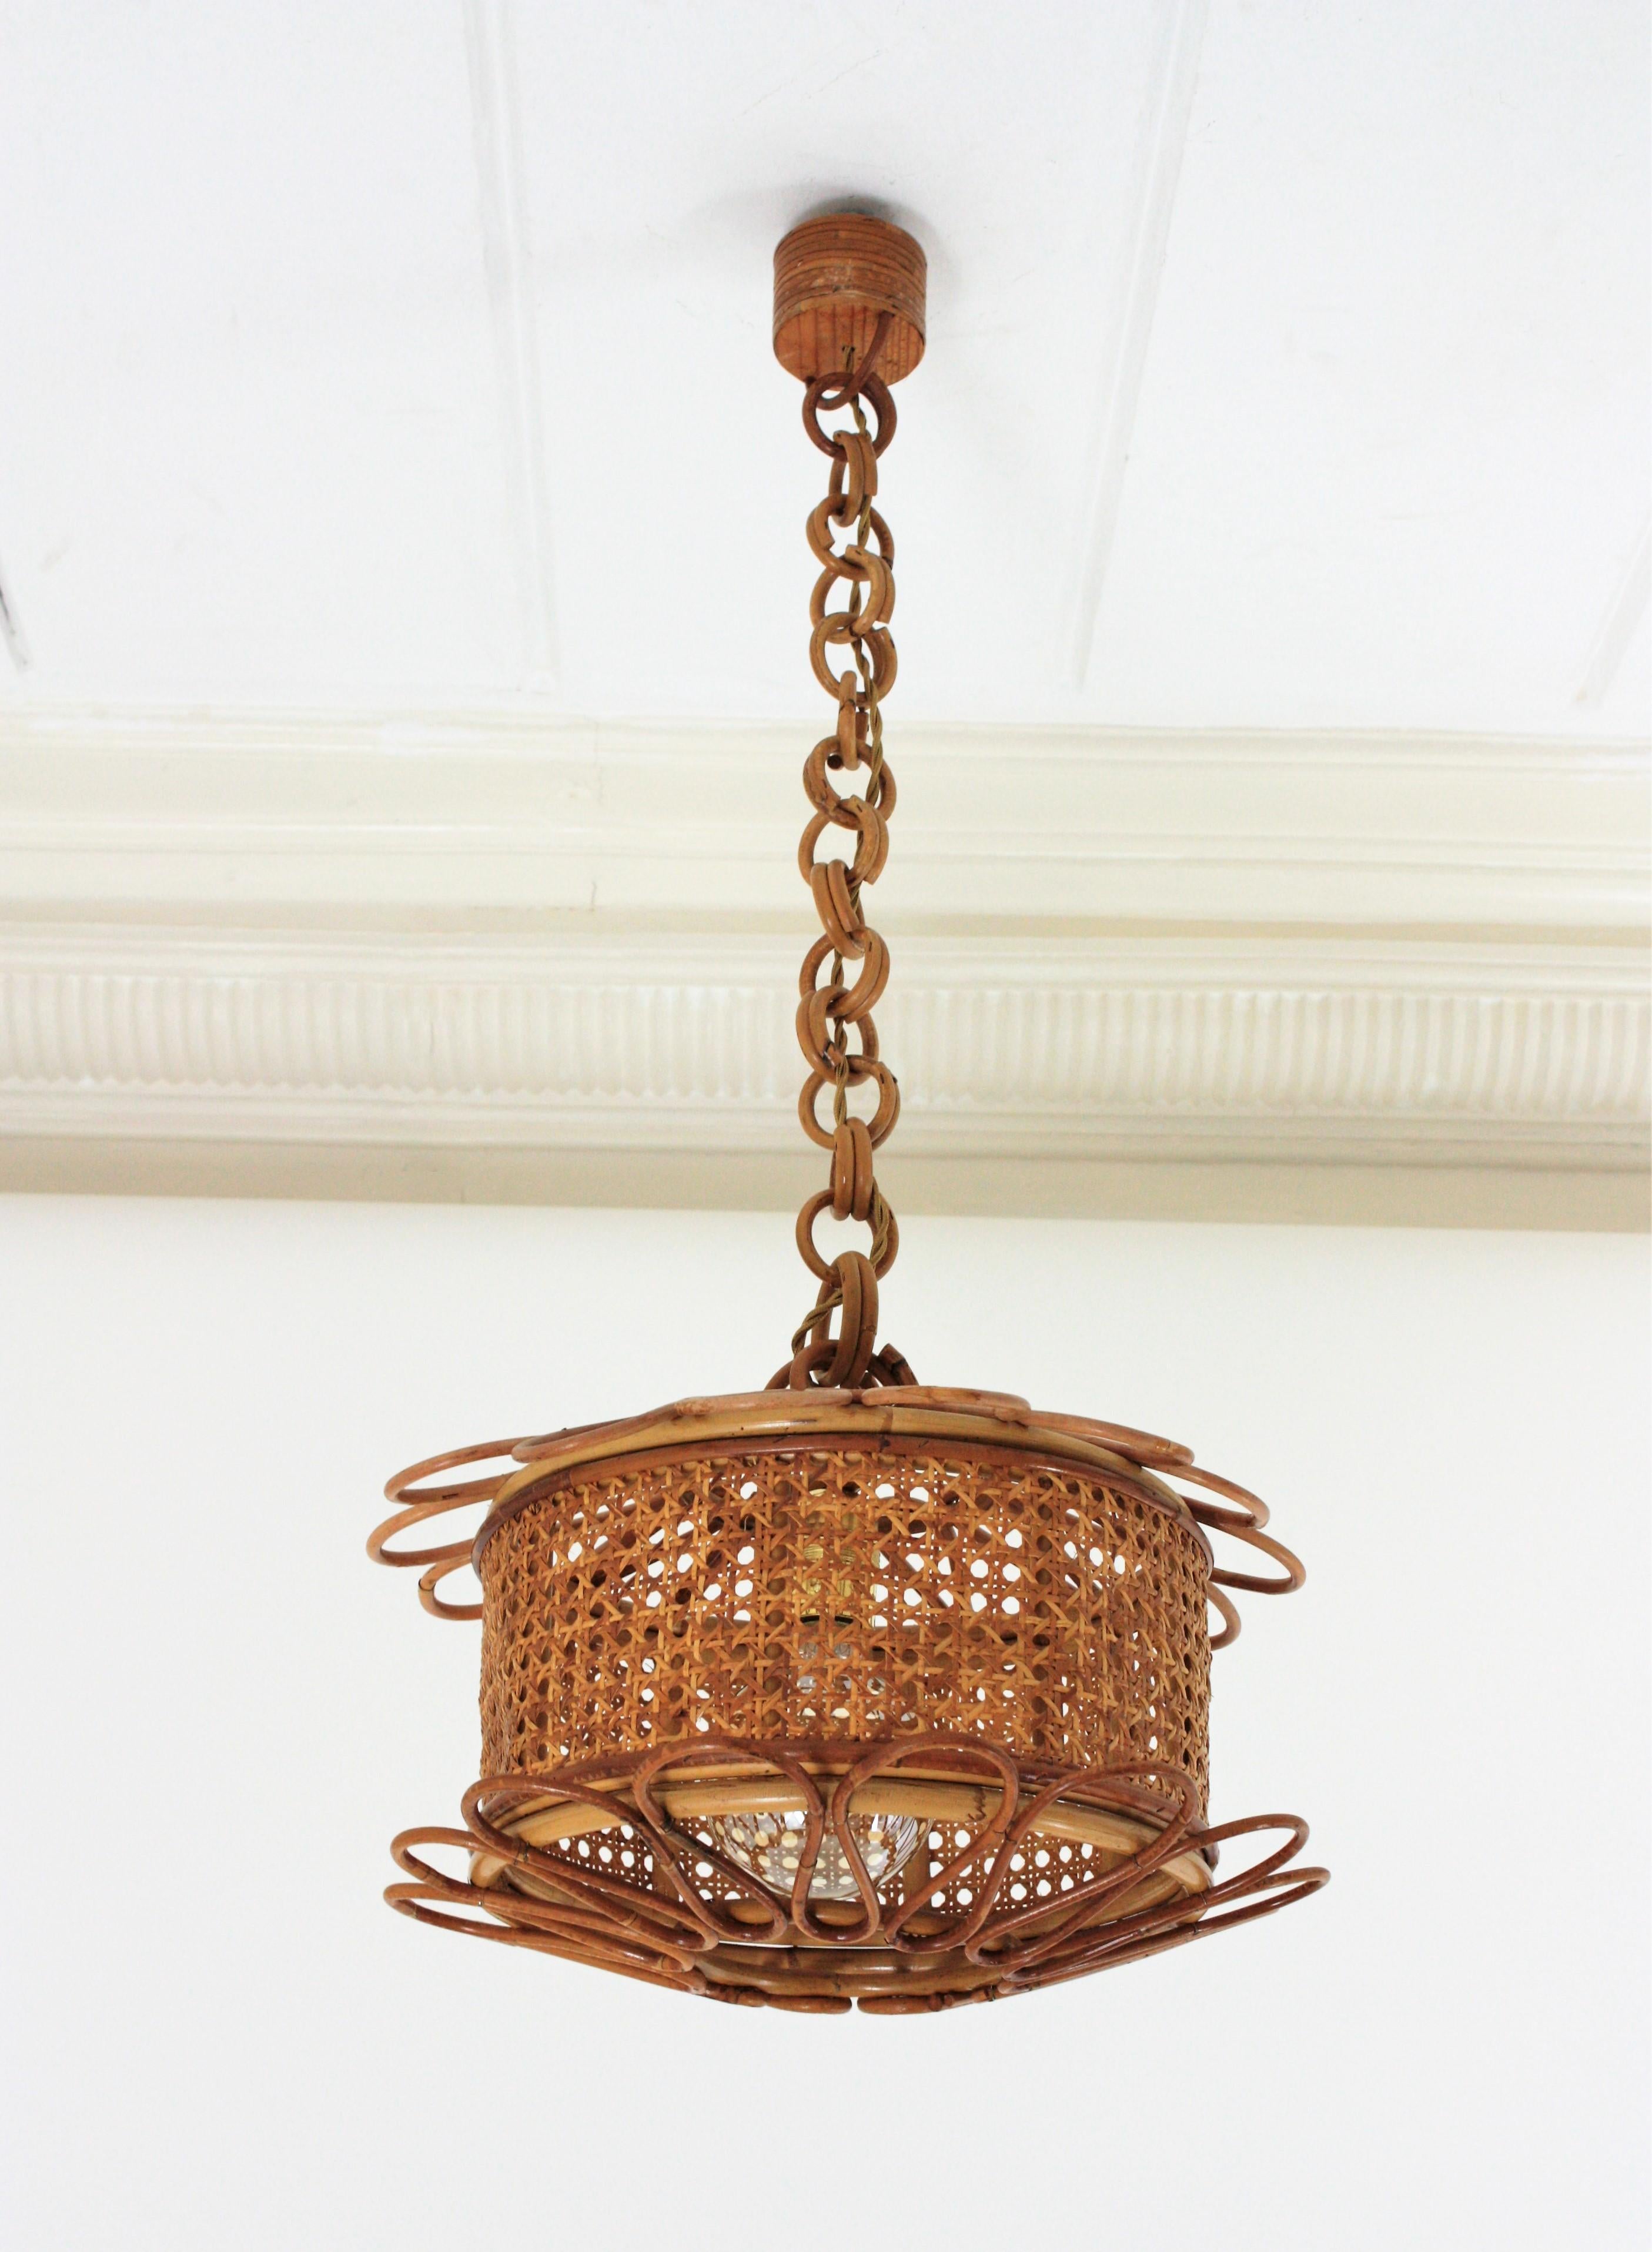 Woven Italian Modernist Wicker Wire and Rattan Pendant Hanging Light, 1950s